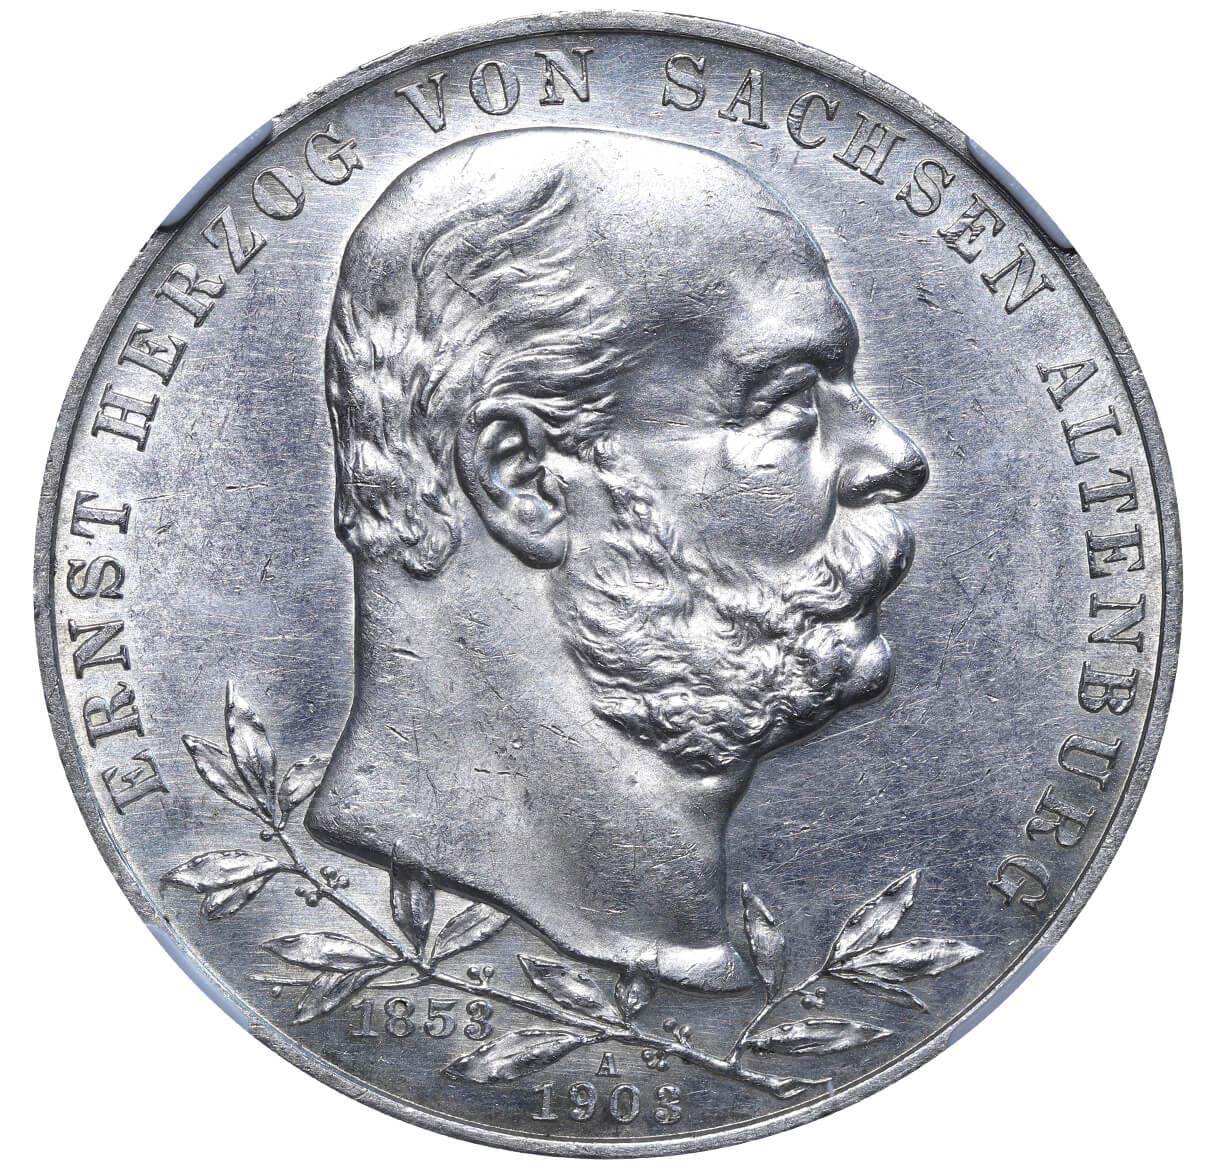 Duchy of Saxe-Altenburg, 5 Mark, 1903 year, A, 50th Anniversary of the Reign of Ernst I, NGC, UNC DE - Image 2 of 3